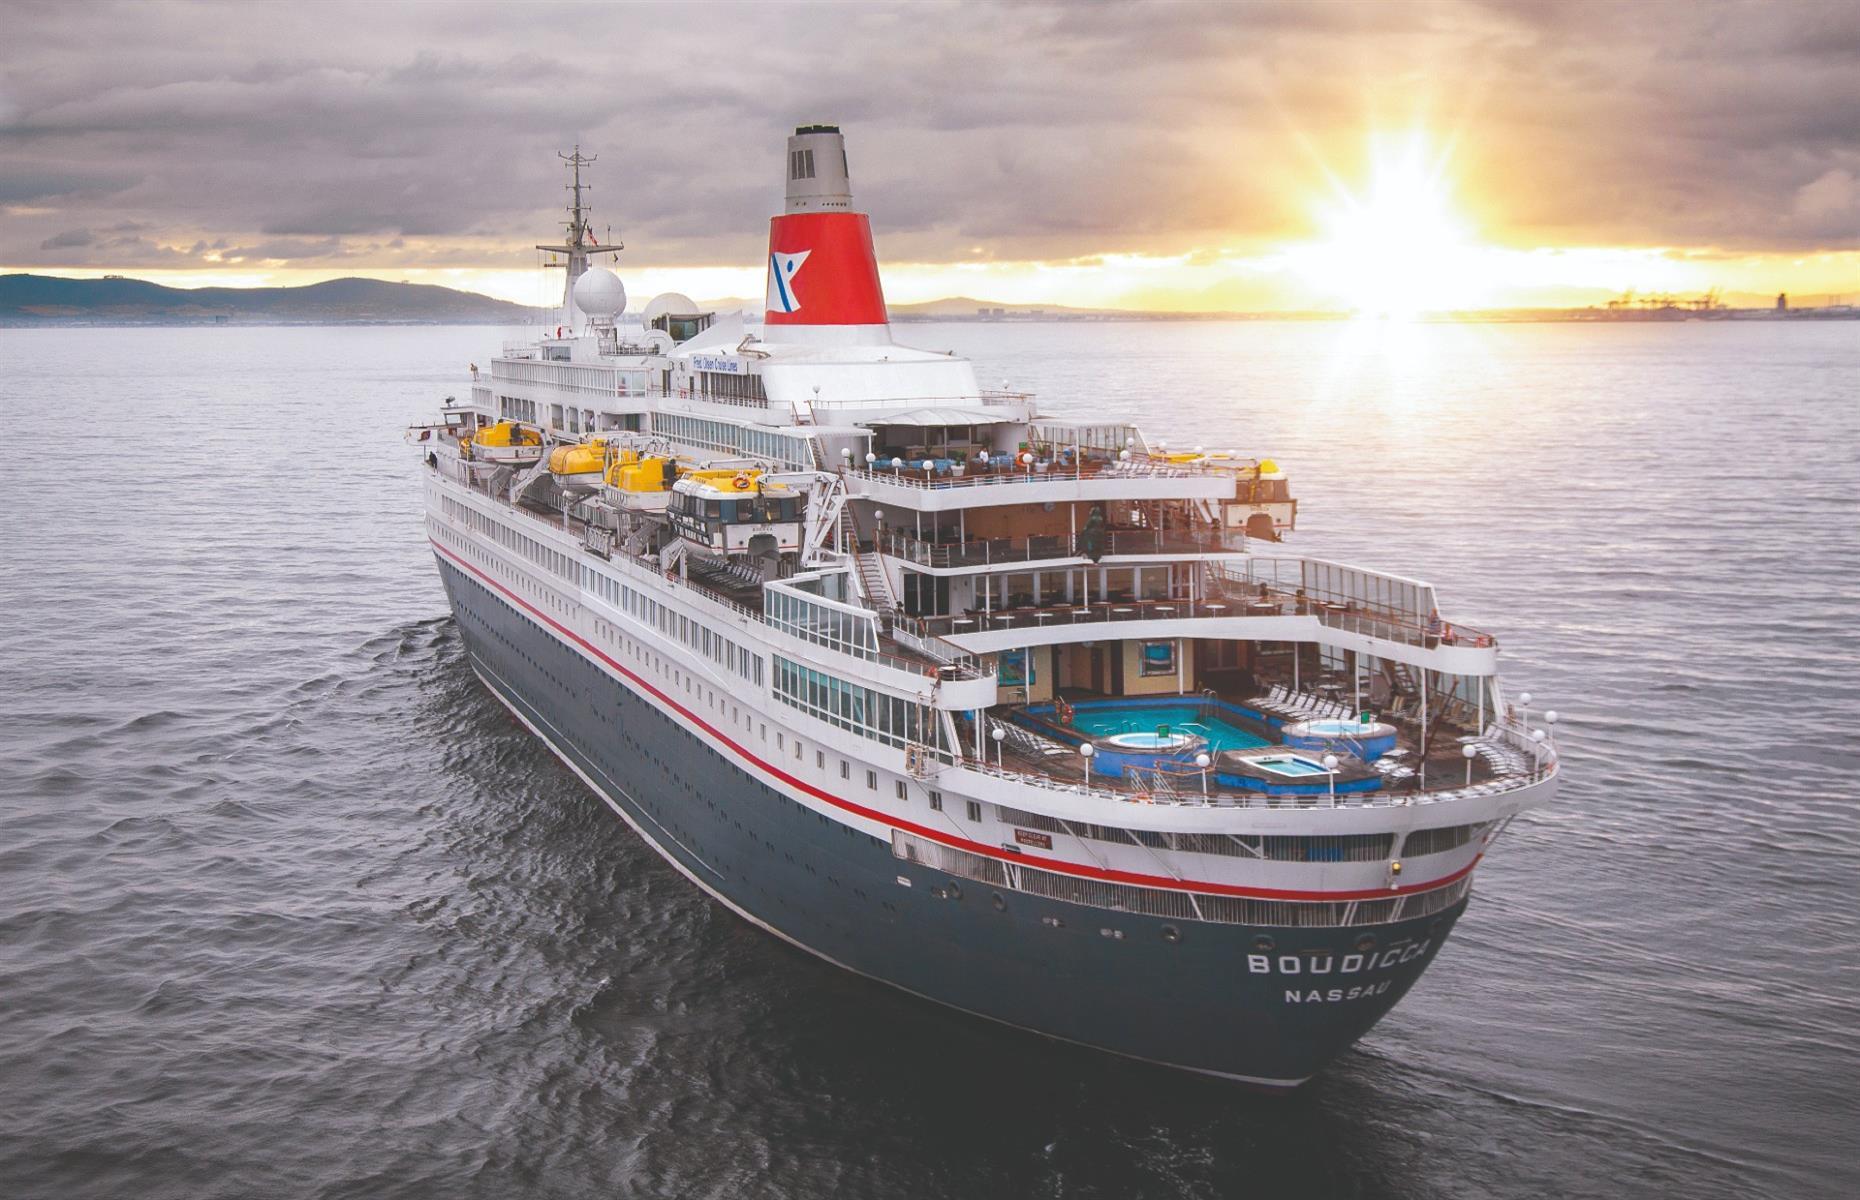 <p>The cruise industry navigated some very choppy waters during and immediately after the COVID-19 pandemic. While many have drifted back out to sea, some of our most-loved ships have been taken out of service, sold or scrapped entirely. Is your favorite on our list?</p>  <p><strong>Read on to discover the once-beloved cruise ships that are no longer sailing...</strong></p>